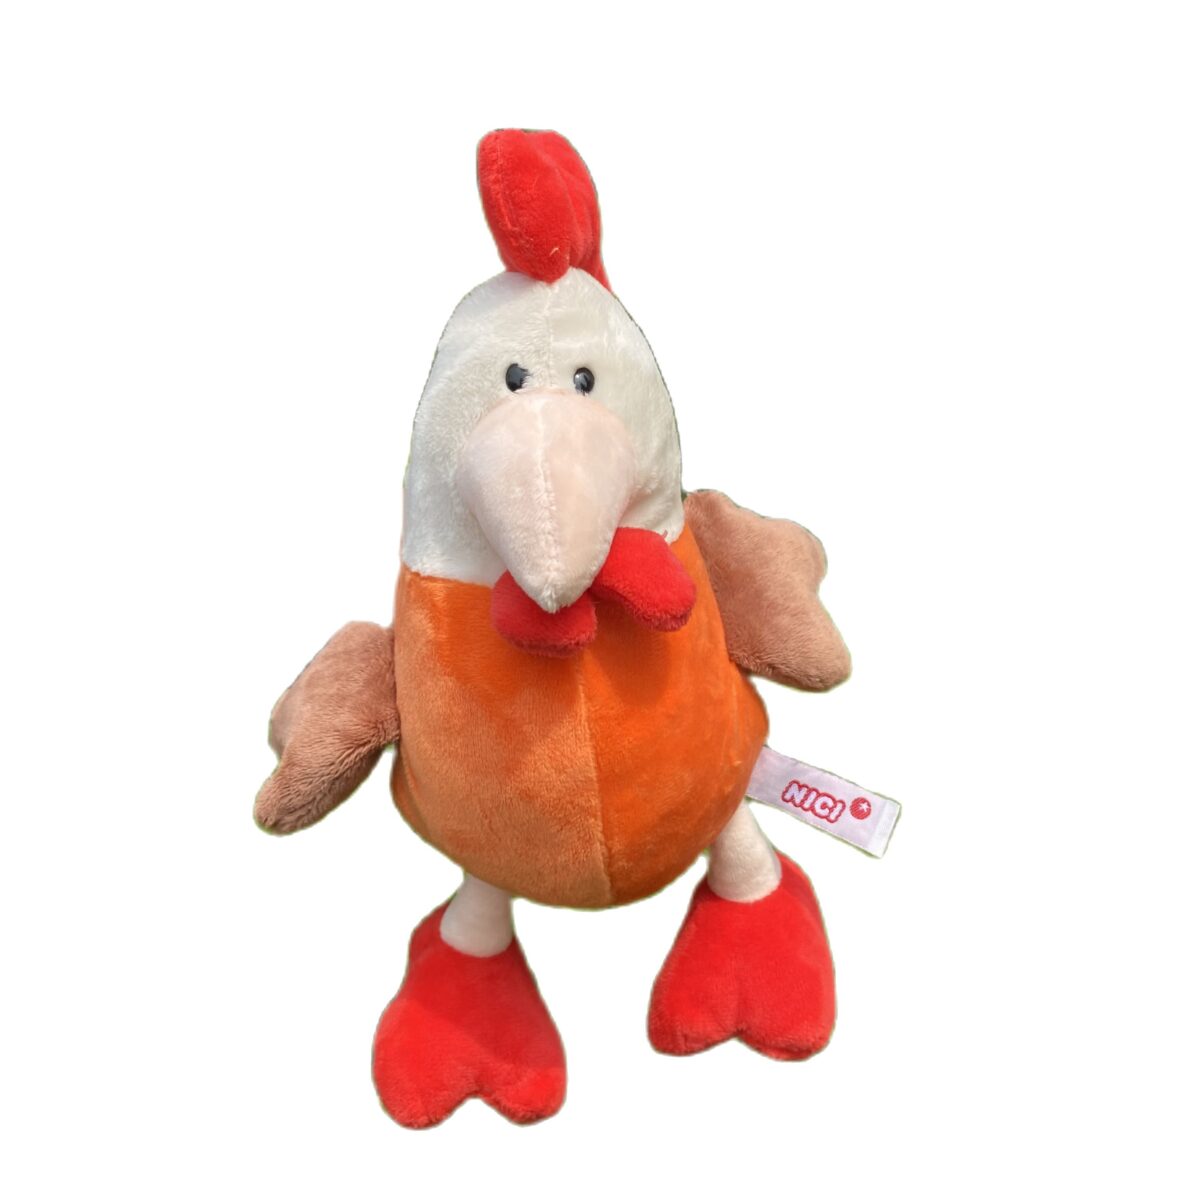 25cm Rooster Soft Stuffed Plush Toy